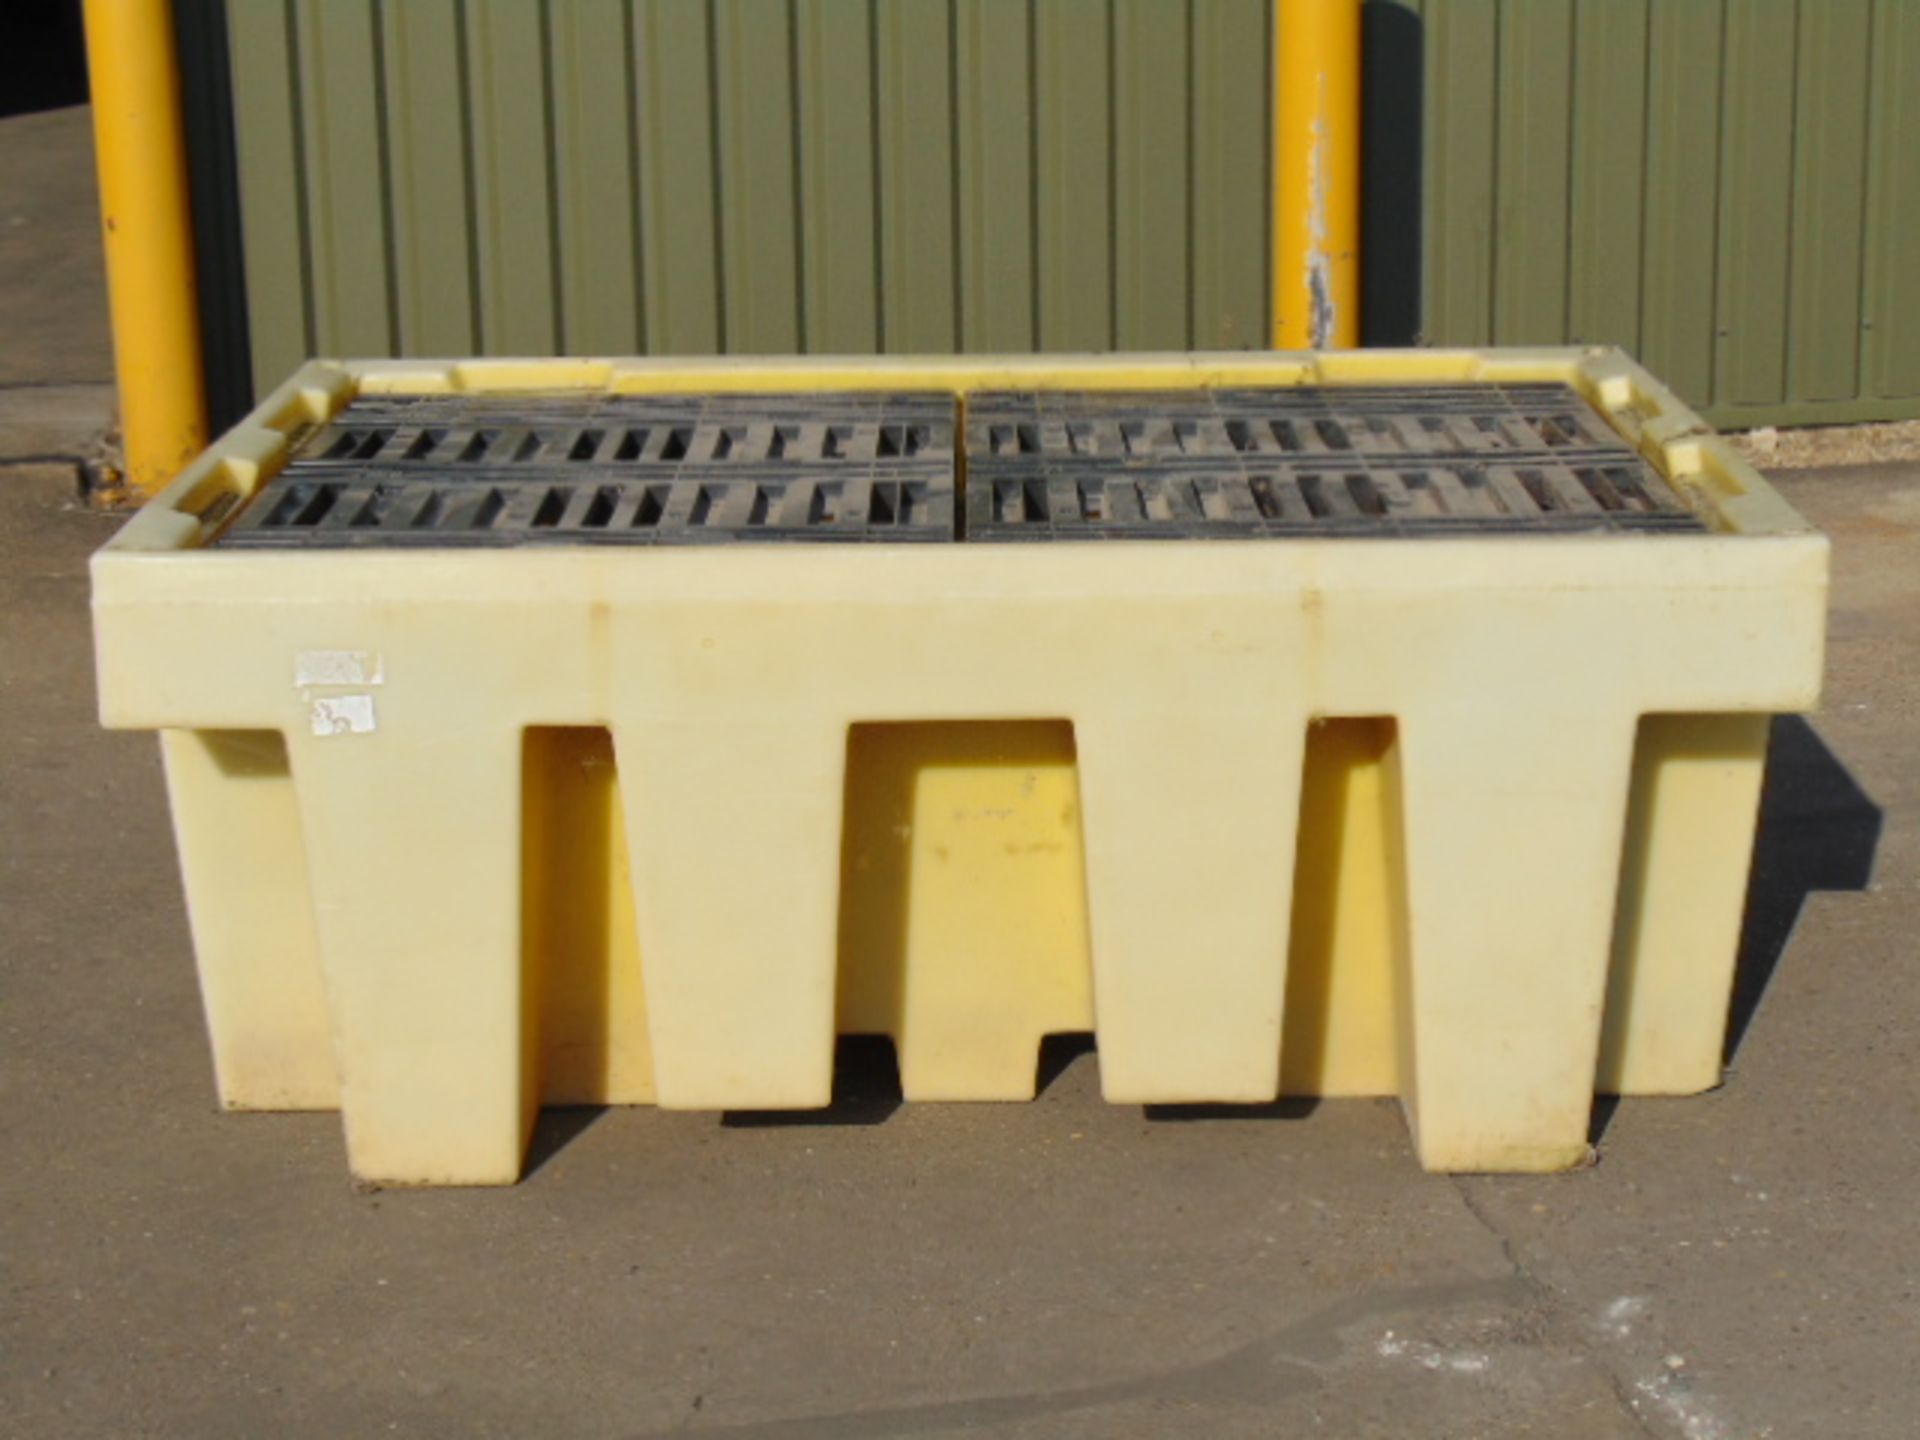 Unissued Double IBC Container Spill Pallet - Image 2 of 3